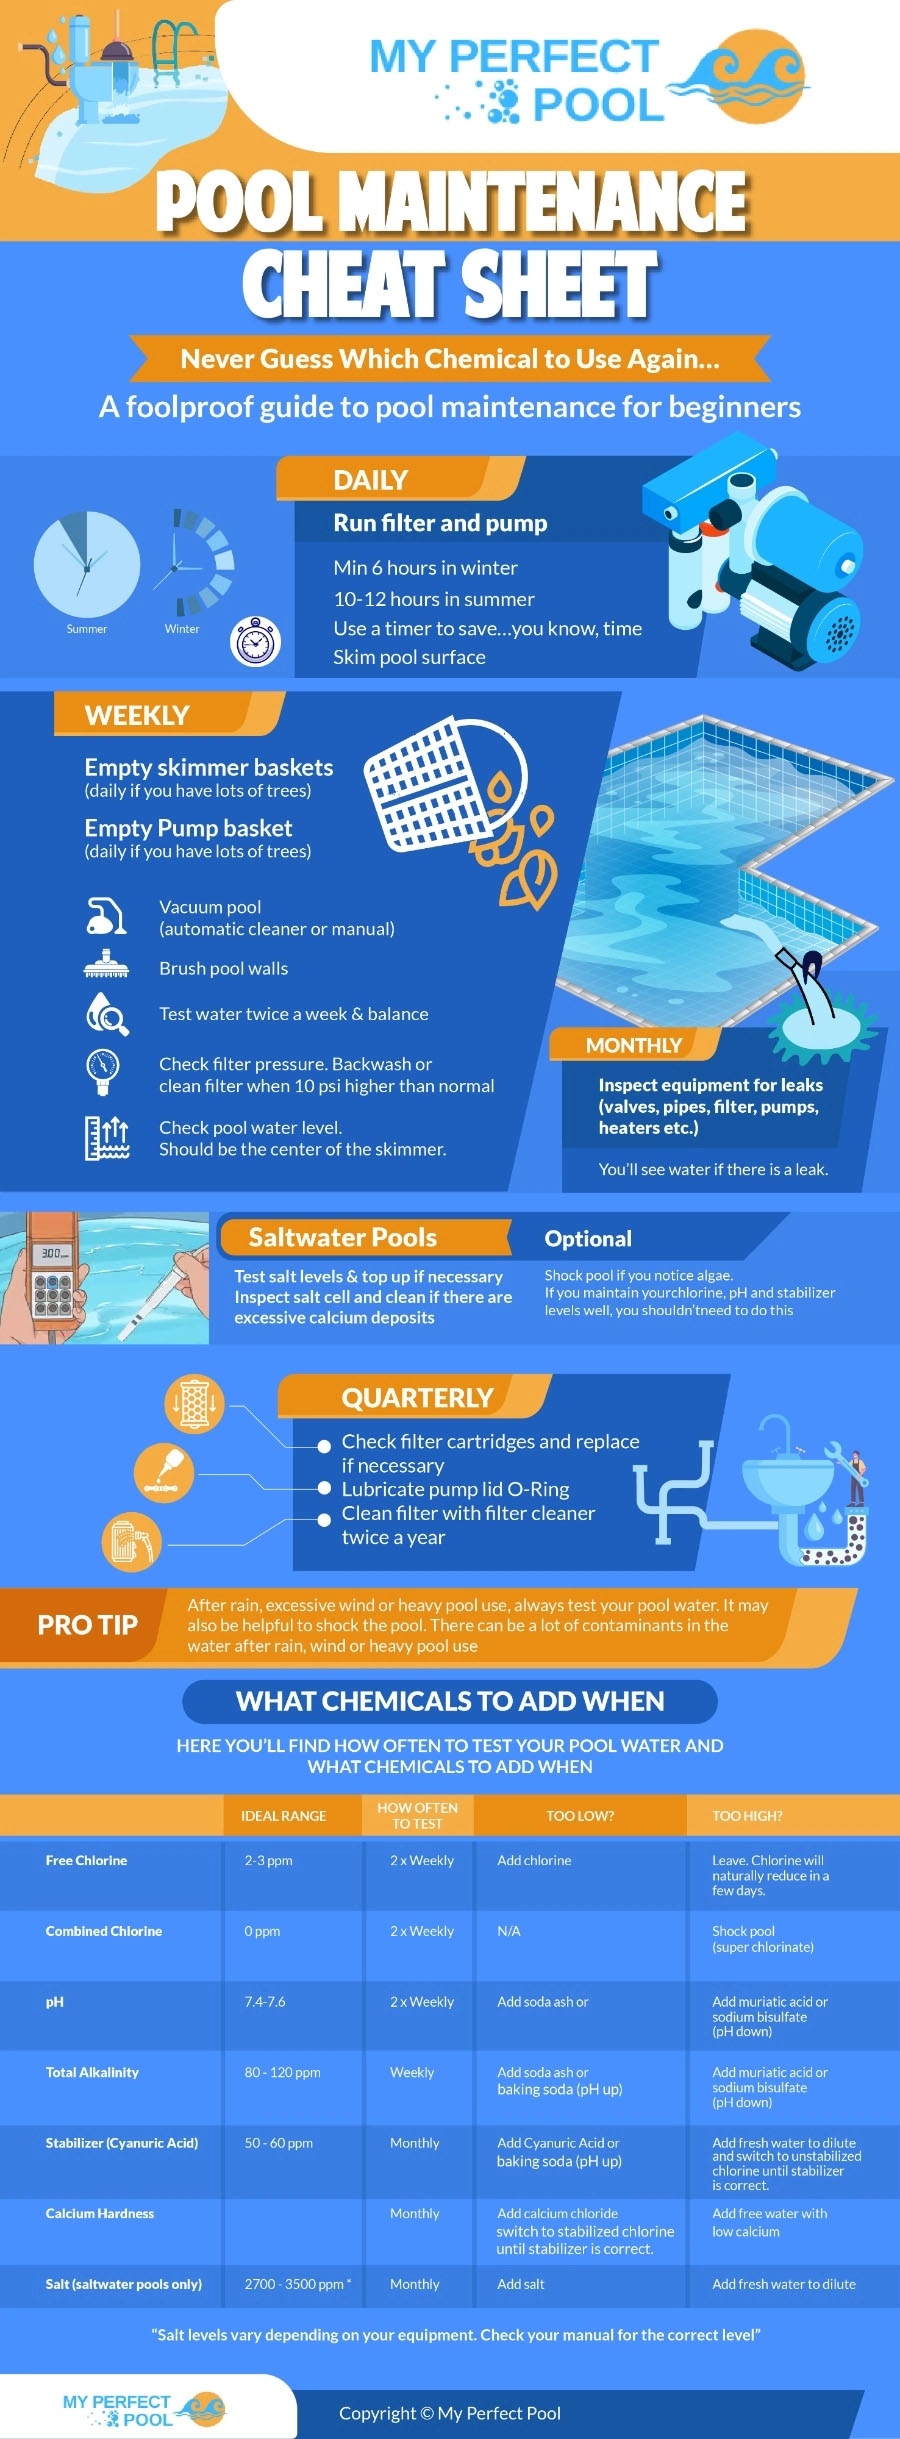 Swimming Pool Maintenance Schedule and Tasks for Beginners